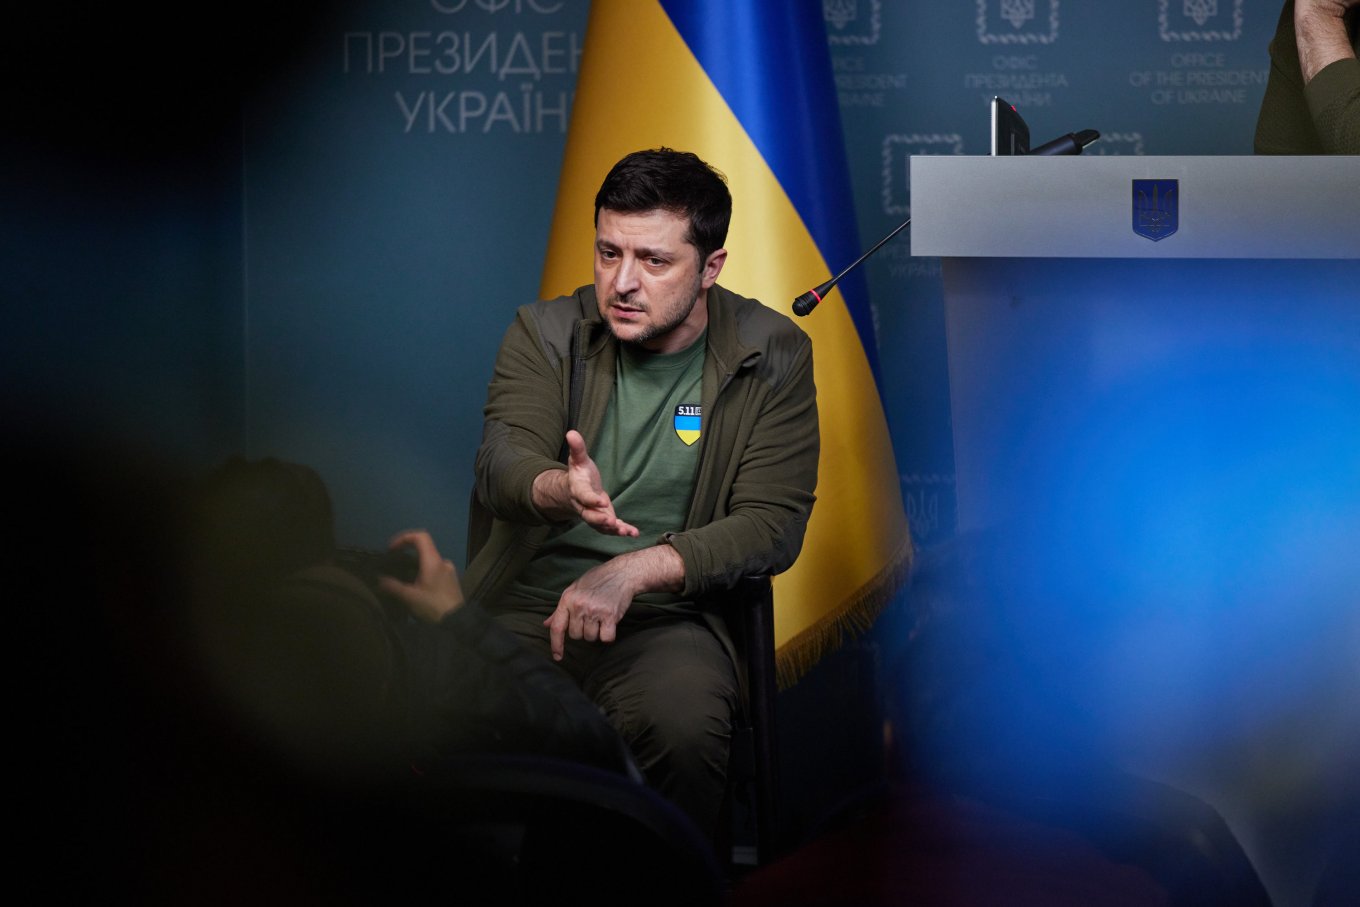 Defense Express / Ukrainian President Volodymyr Zelensky mentioned mobile crematoriums deployed by Russian army during the conversation with representatives of foreign media / Russia Hiding Actual Numbers of Losses in Ukraine